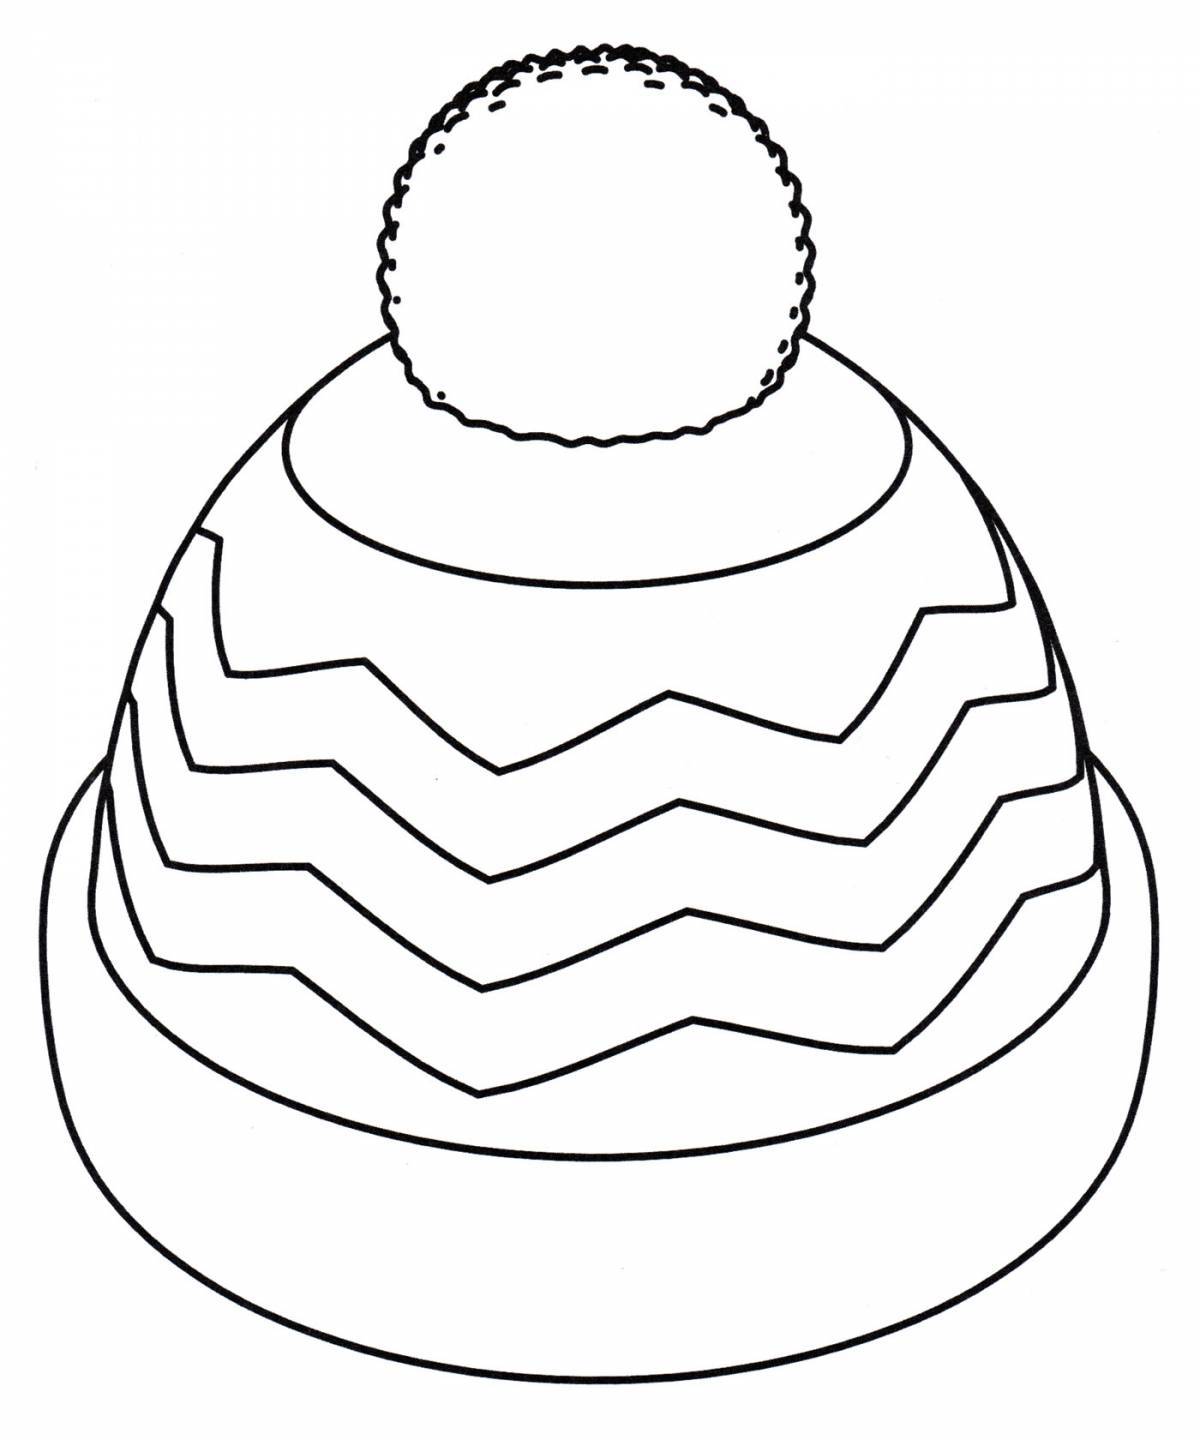 Glittering Hat Coloring Page for Beginners